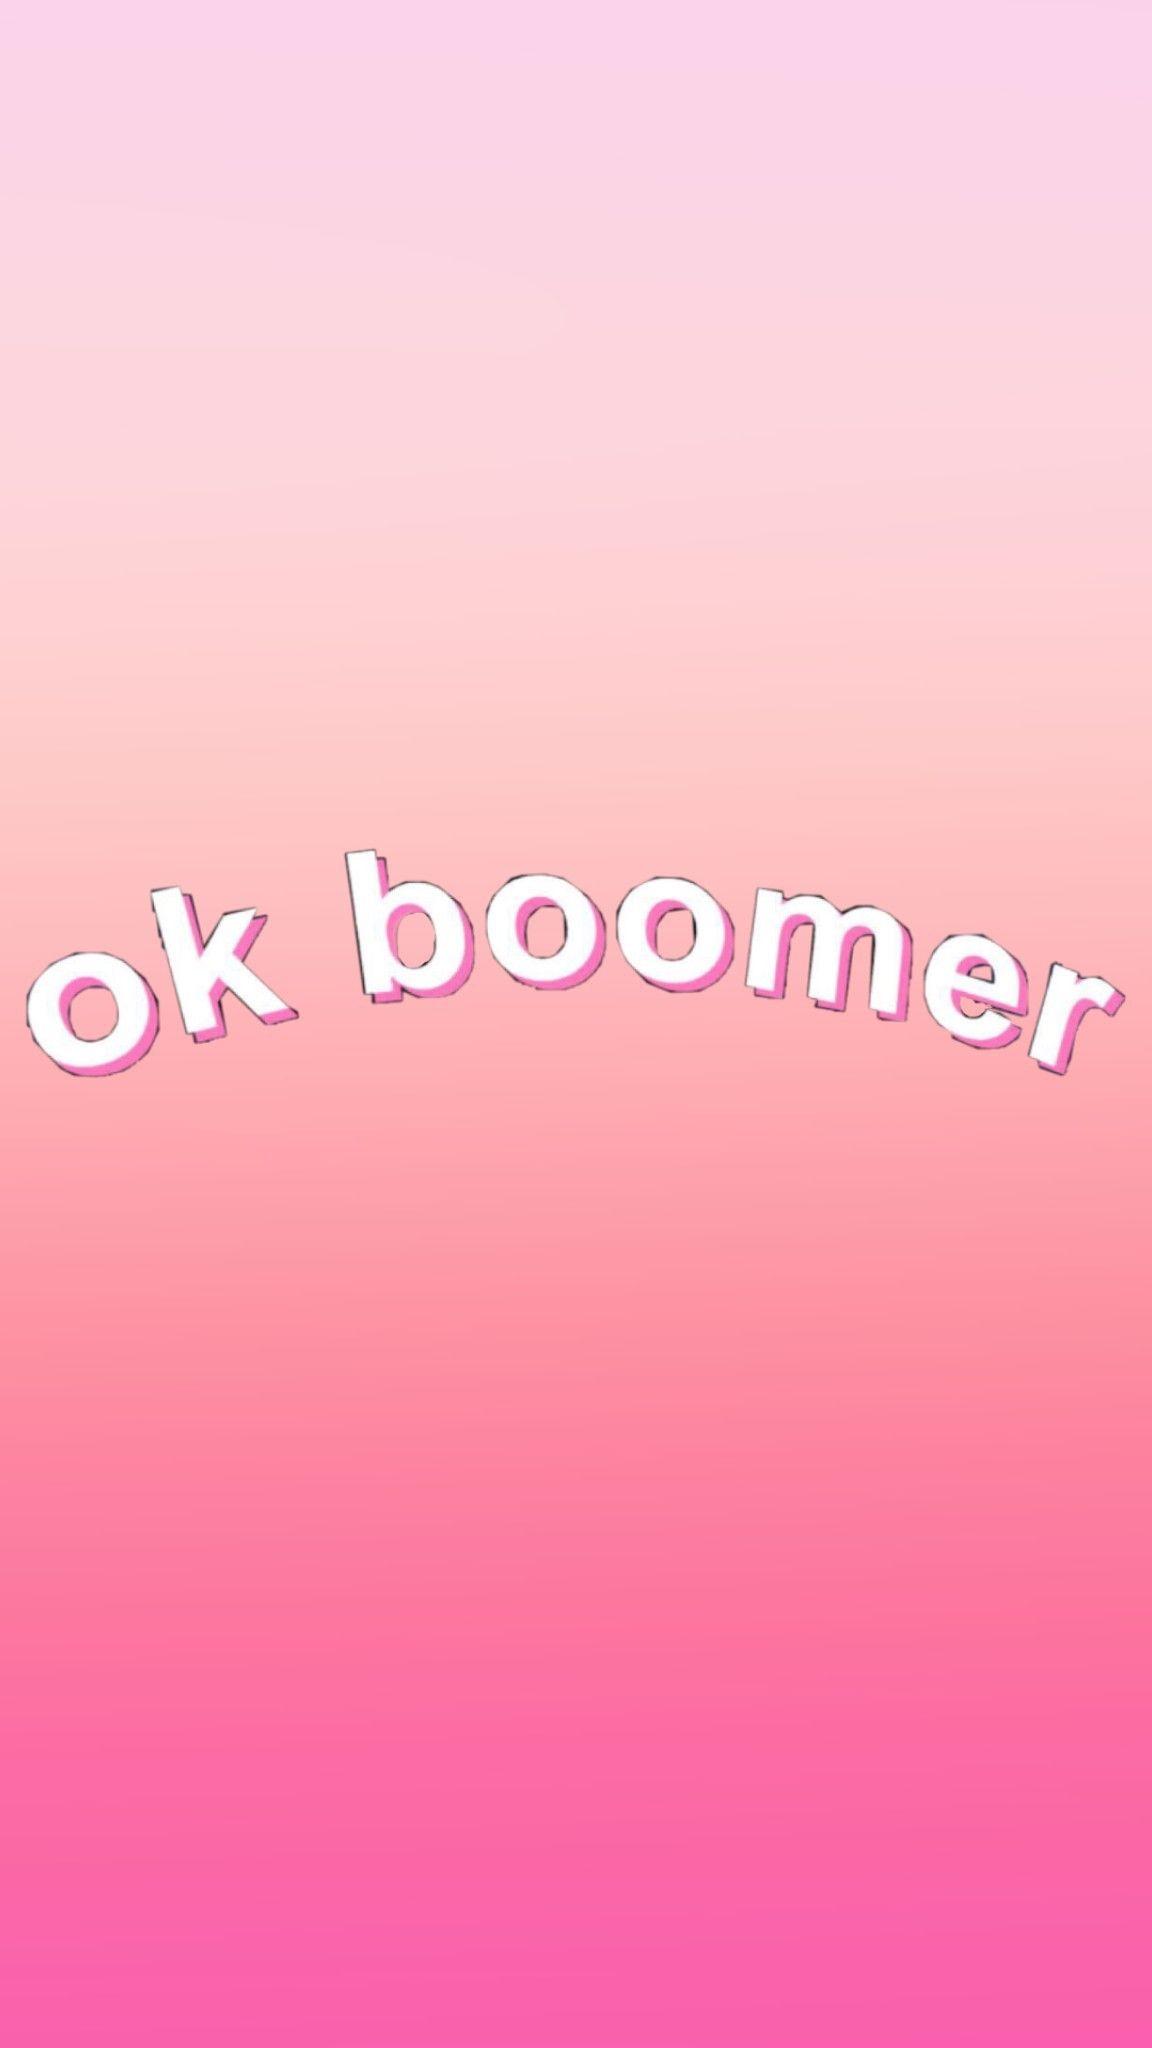 Ok boomer wallpaper. Funny iphone wallpaper, iPhone background